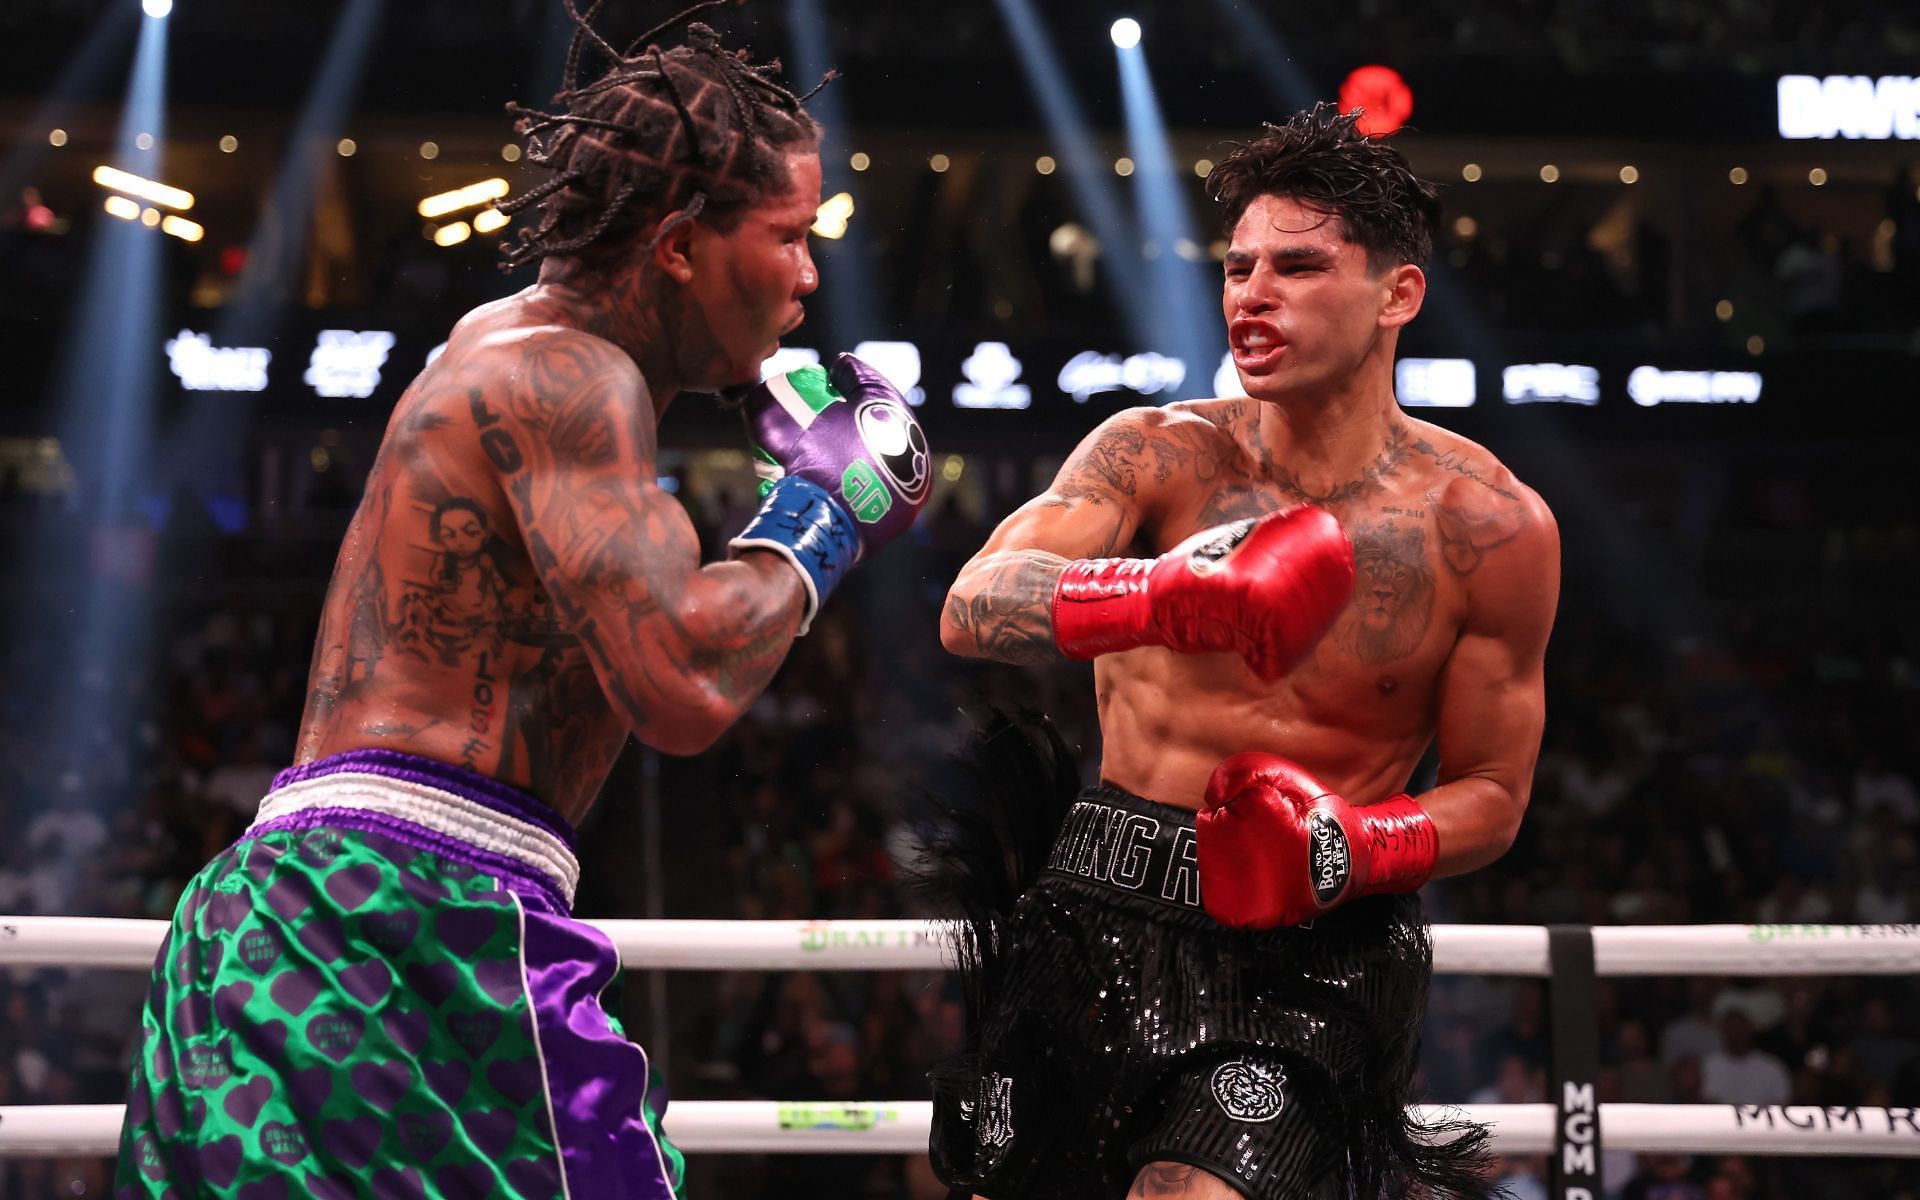 Gervonta Davis (left) holds the distinction of being the first, and thus far only, fighter to defeat Ryan Garcia (right) in the sport of professional boxing [Image courtesy: Getty Images]